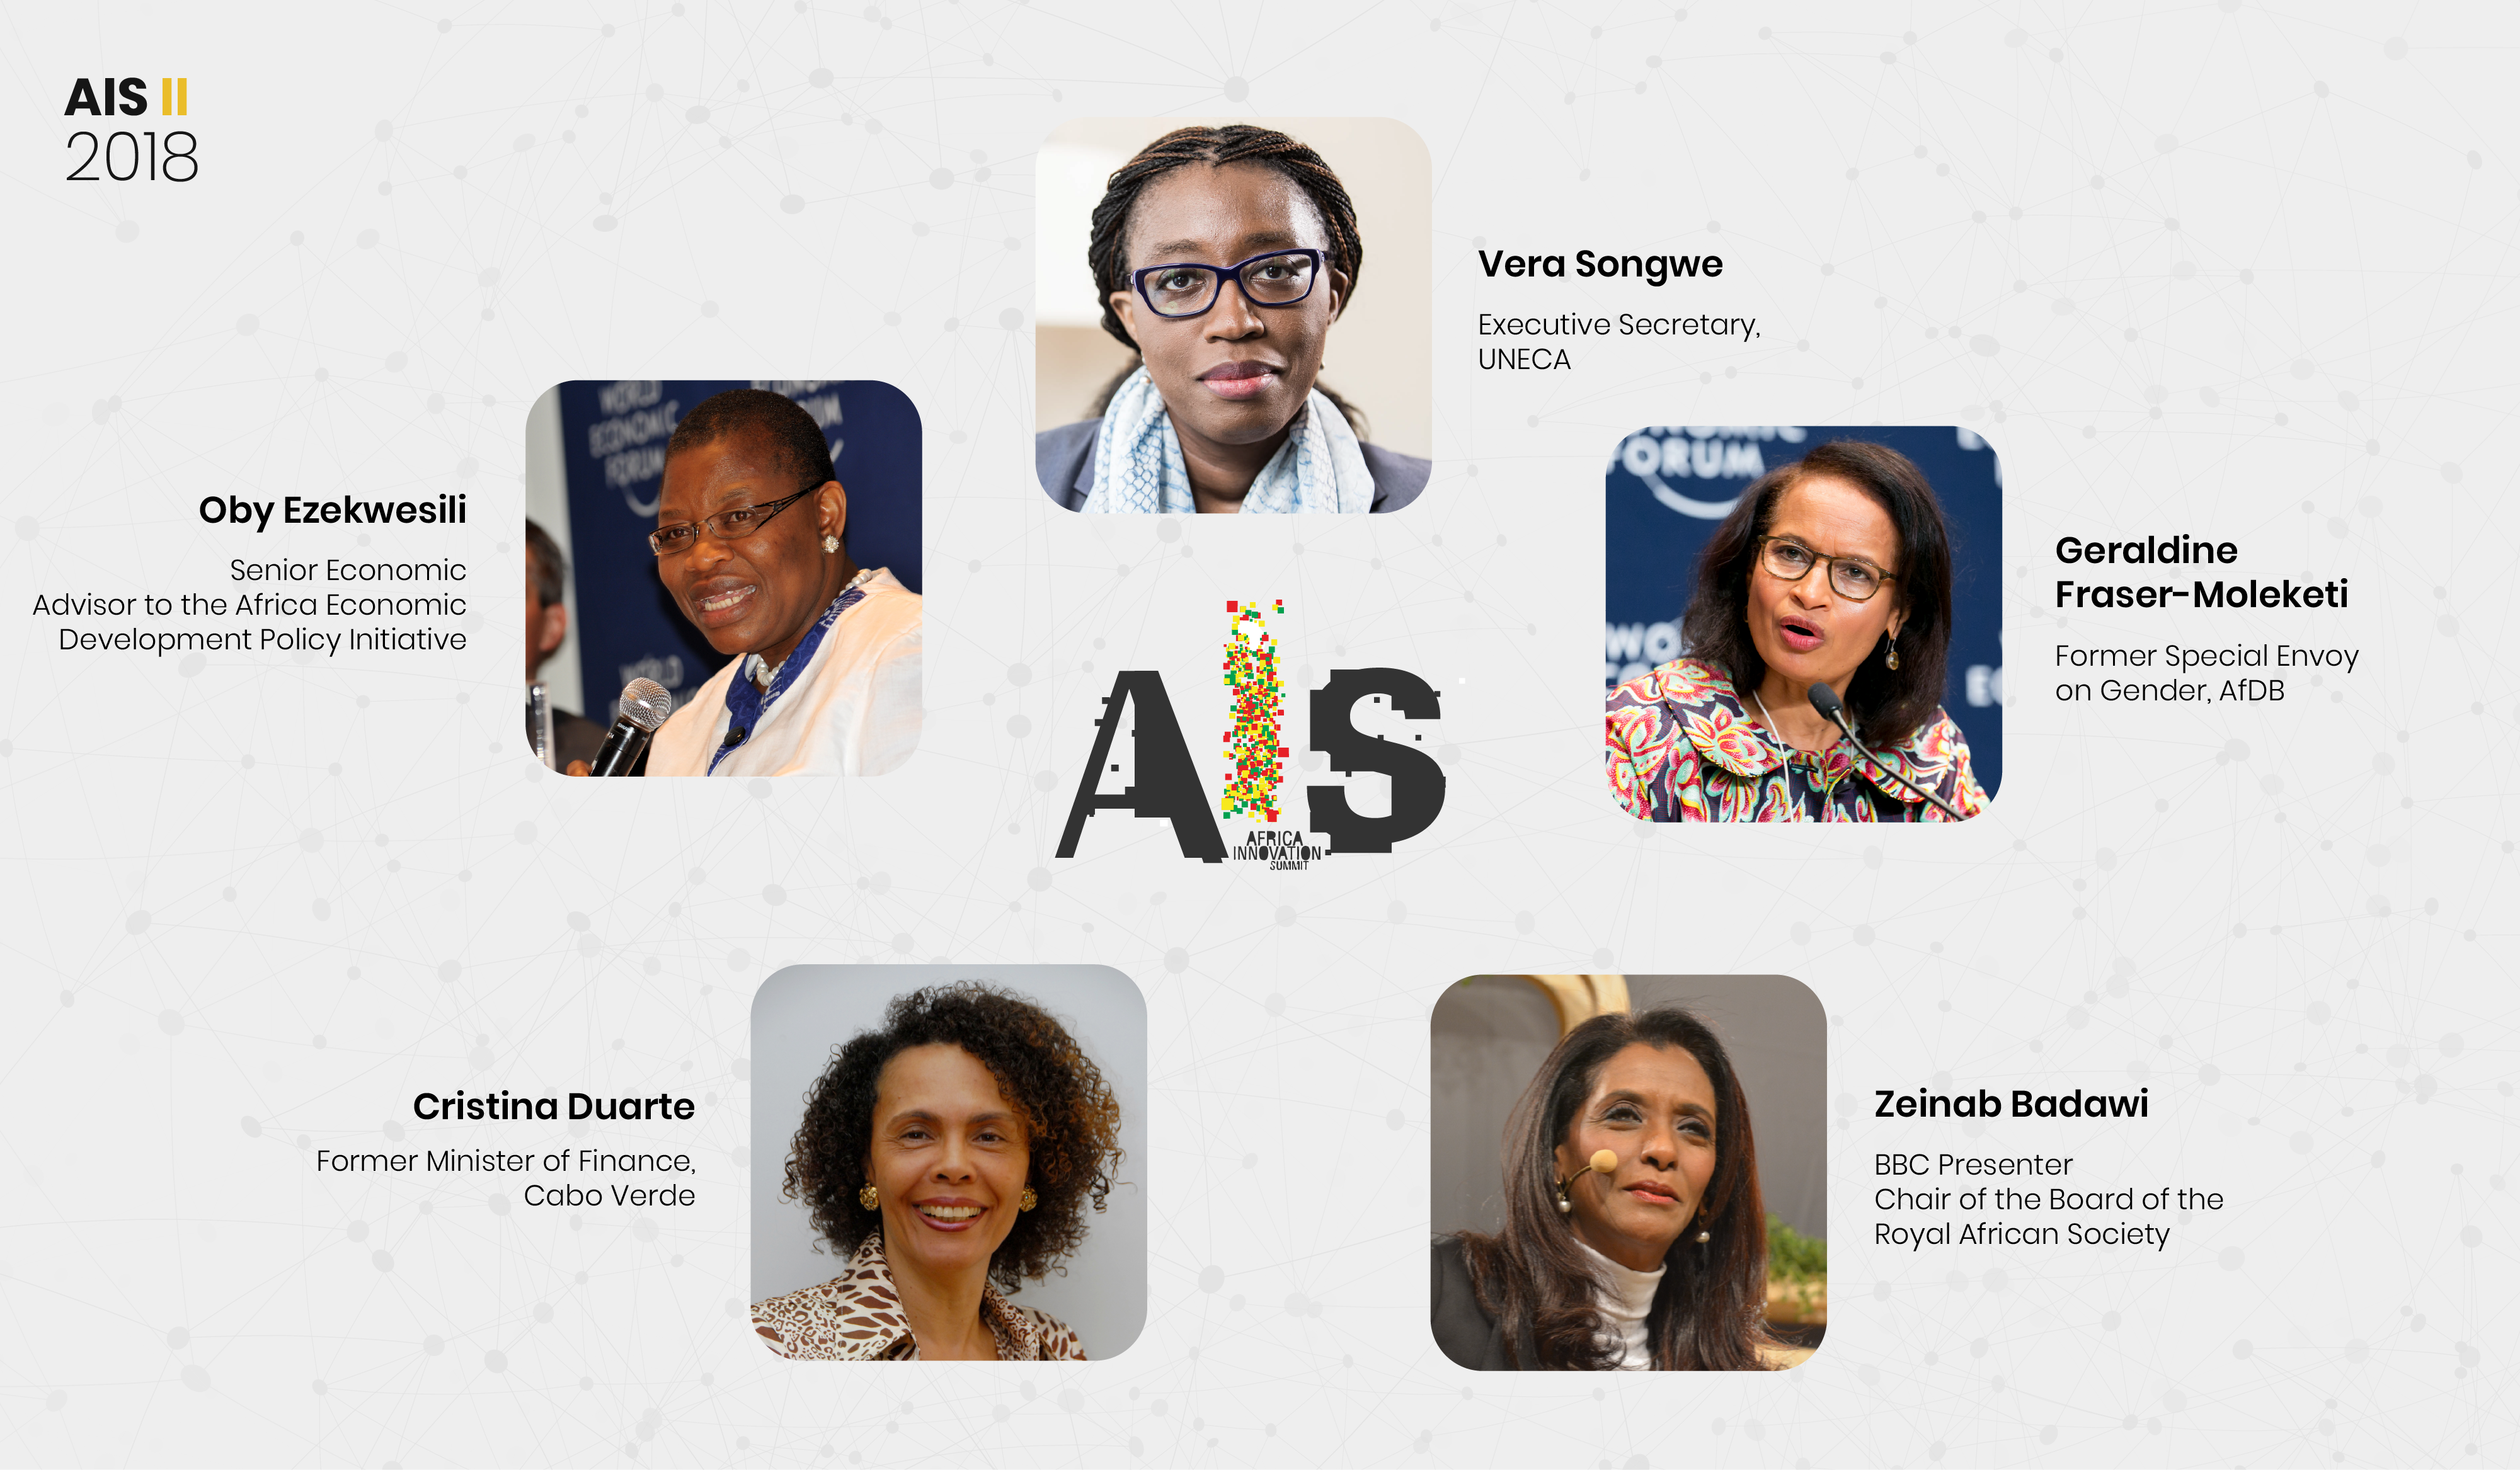 Five Leading African Women confirmed participation to the #AIS2018